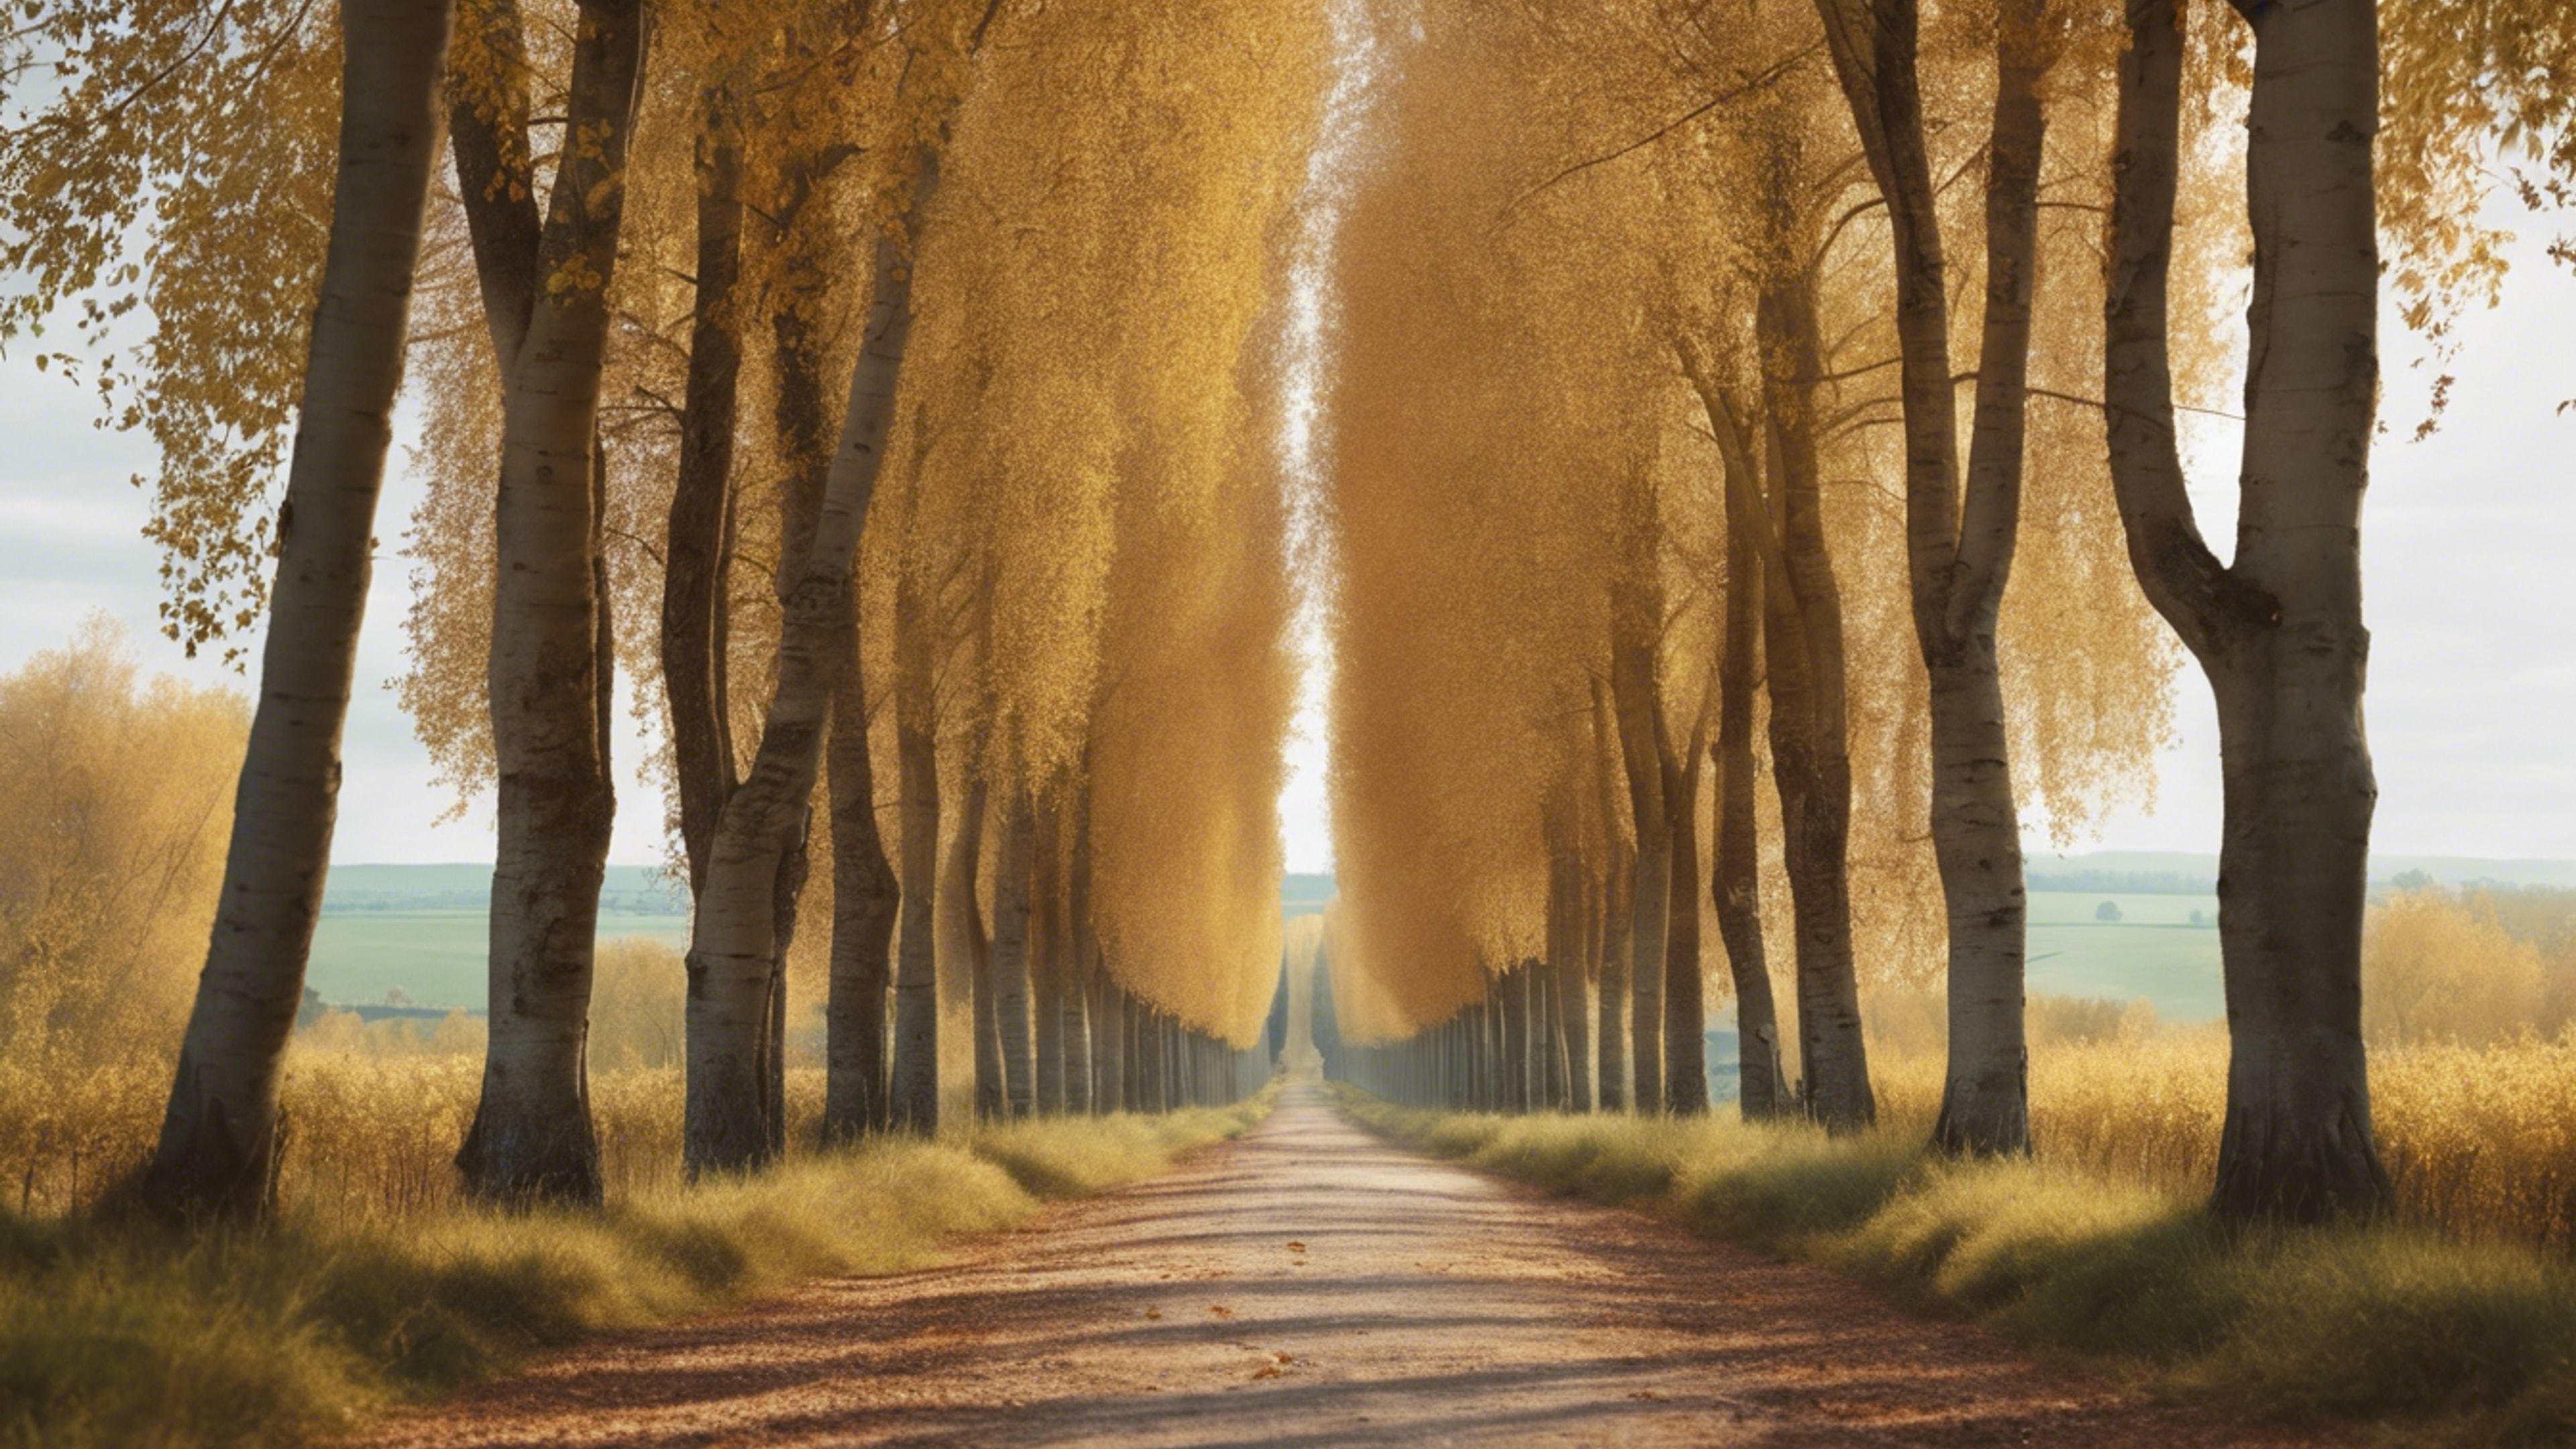 A peaceful French country lane lined with tall, mature poplar trees in autumn. วอลล์เปเปอร์[76d1ad7093004c7494eb]